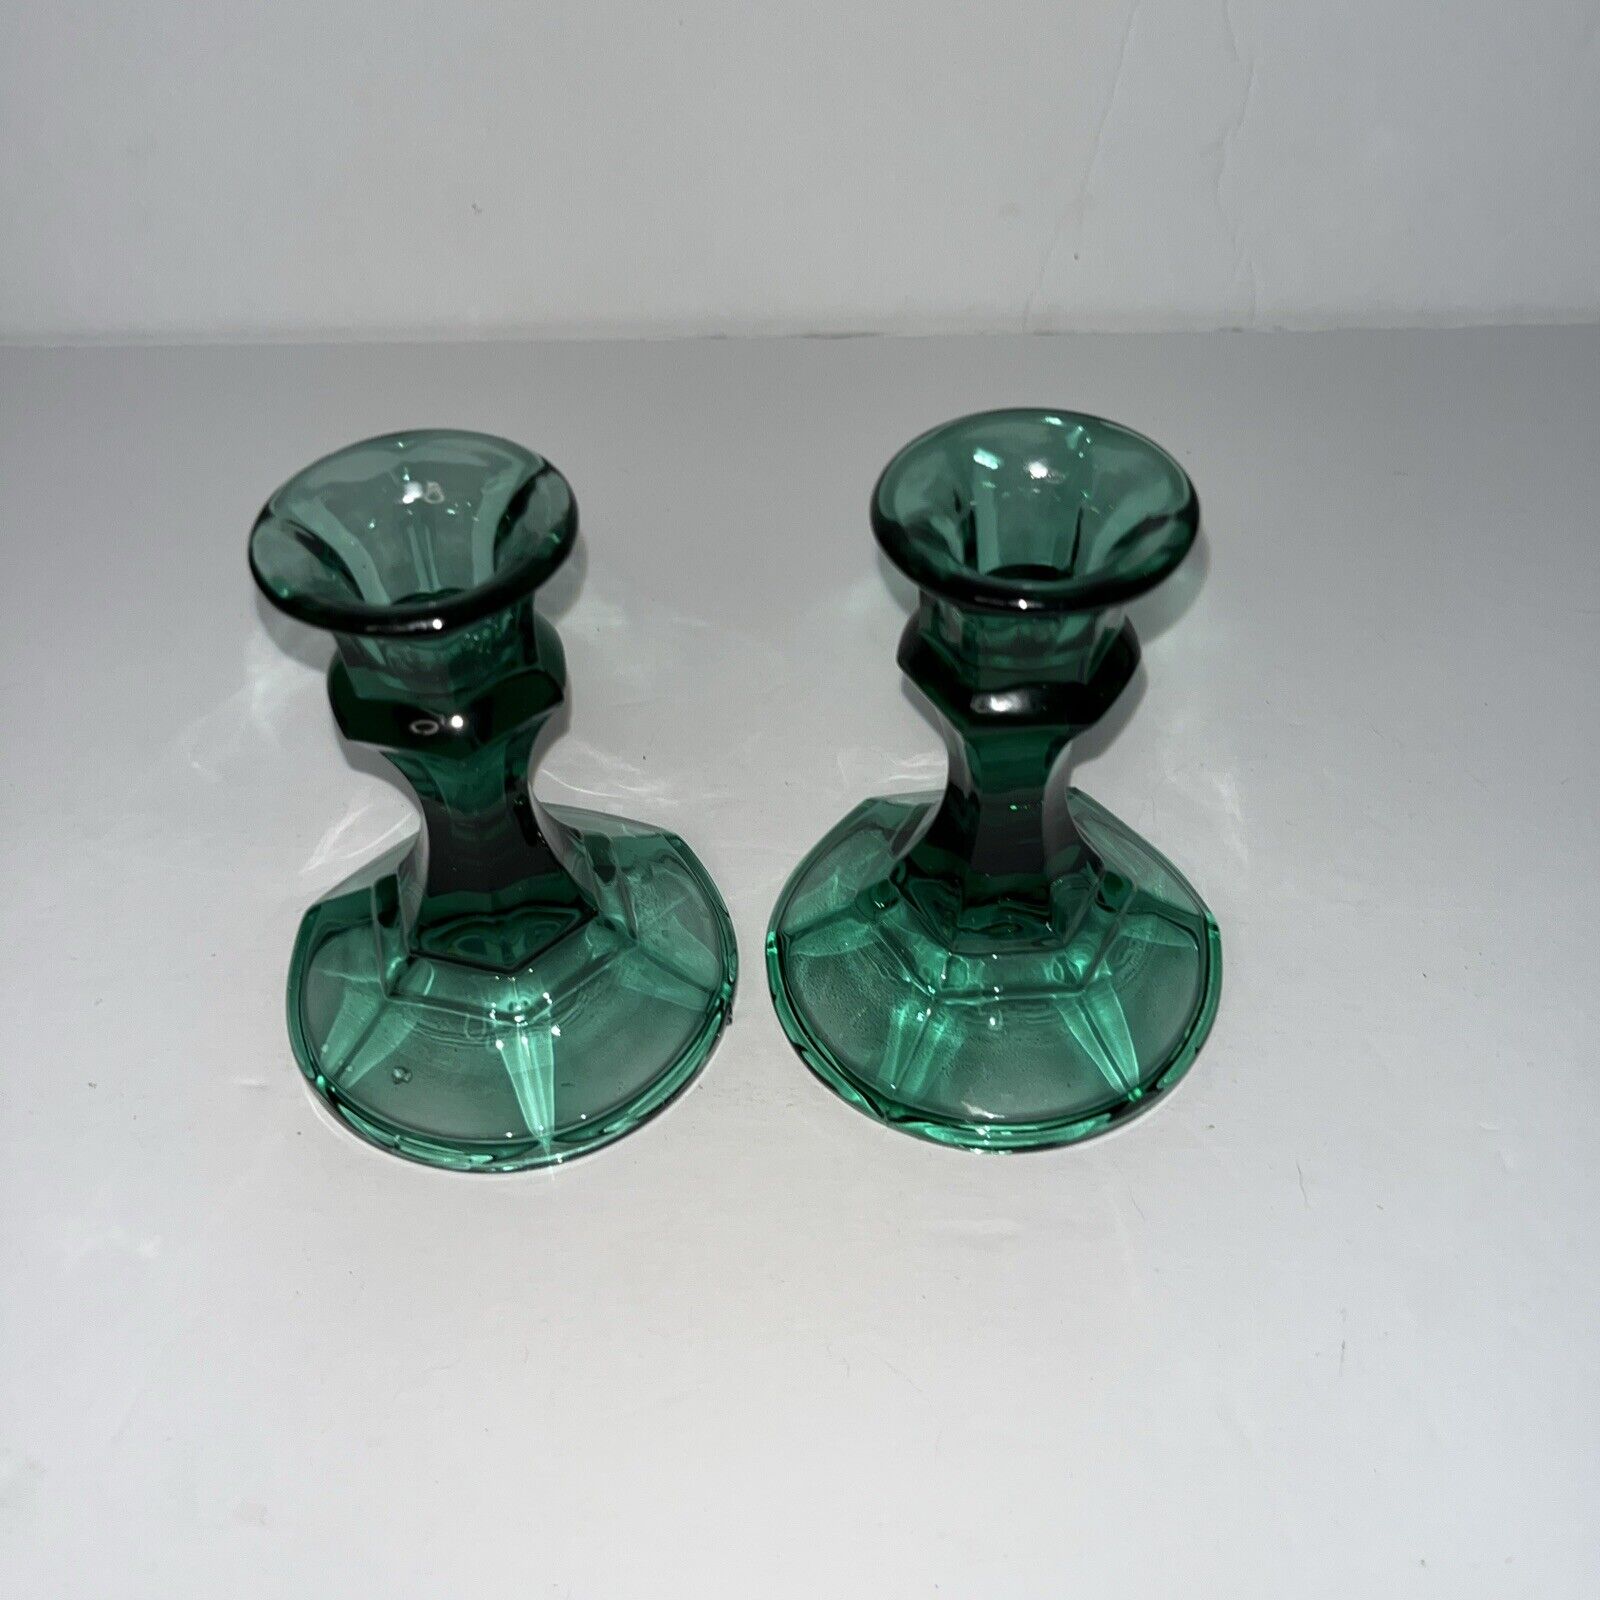 2 Vintage Indiana Glass Candlestick Holders Teal Green Emerald 4.25” Pair Set